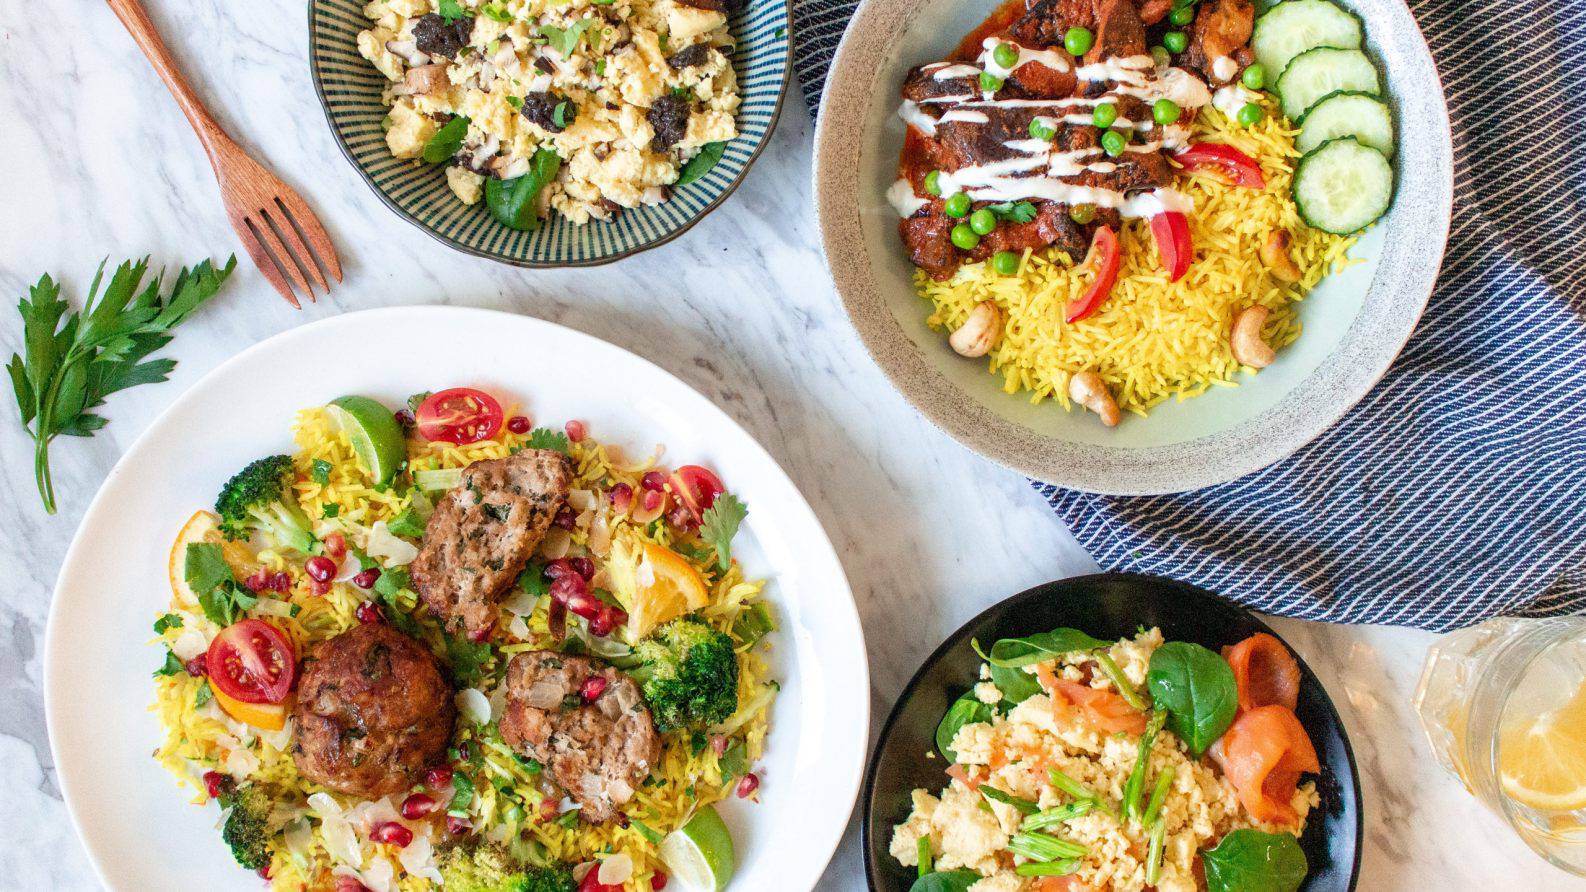 11 healthy meal plans in Hong Kong to smash your fitness goals